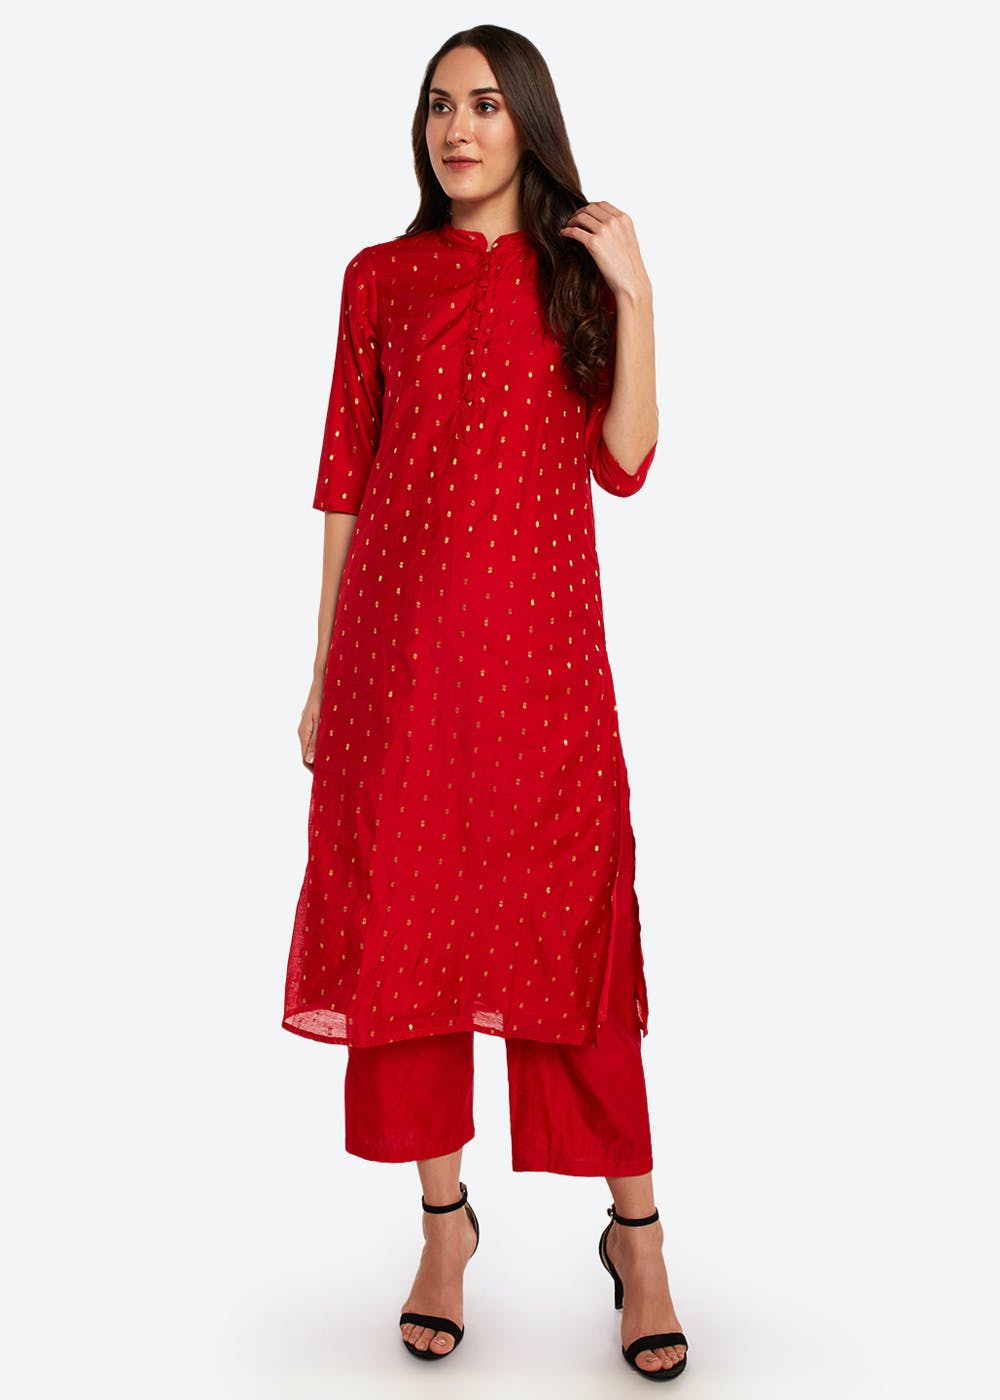 What are the different types of kurtis? - Quora